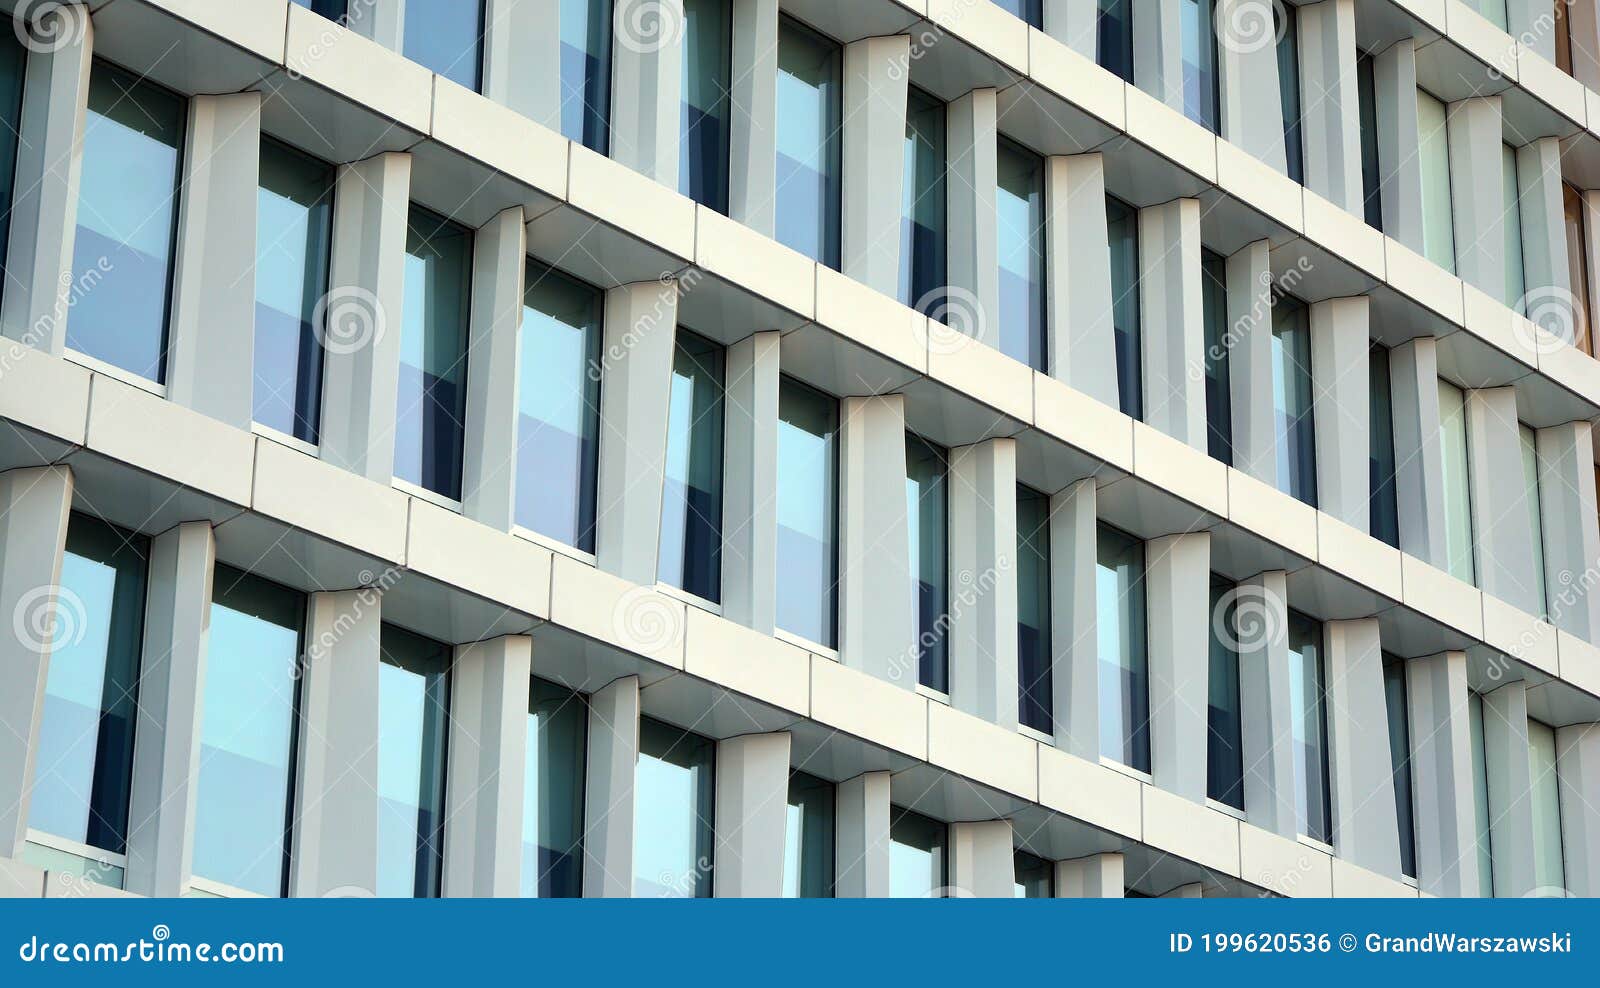 Blue Curtain Wall Made of Toned Glass and Steel Constructions Under ...